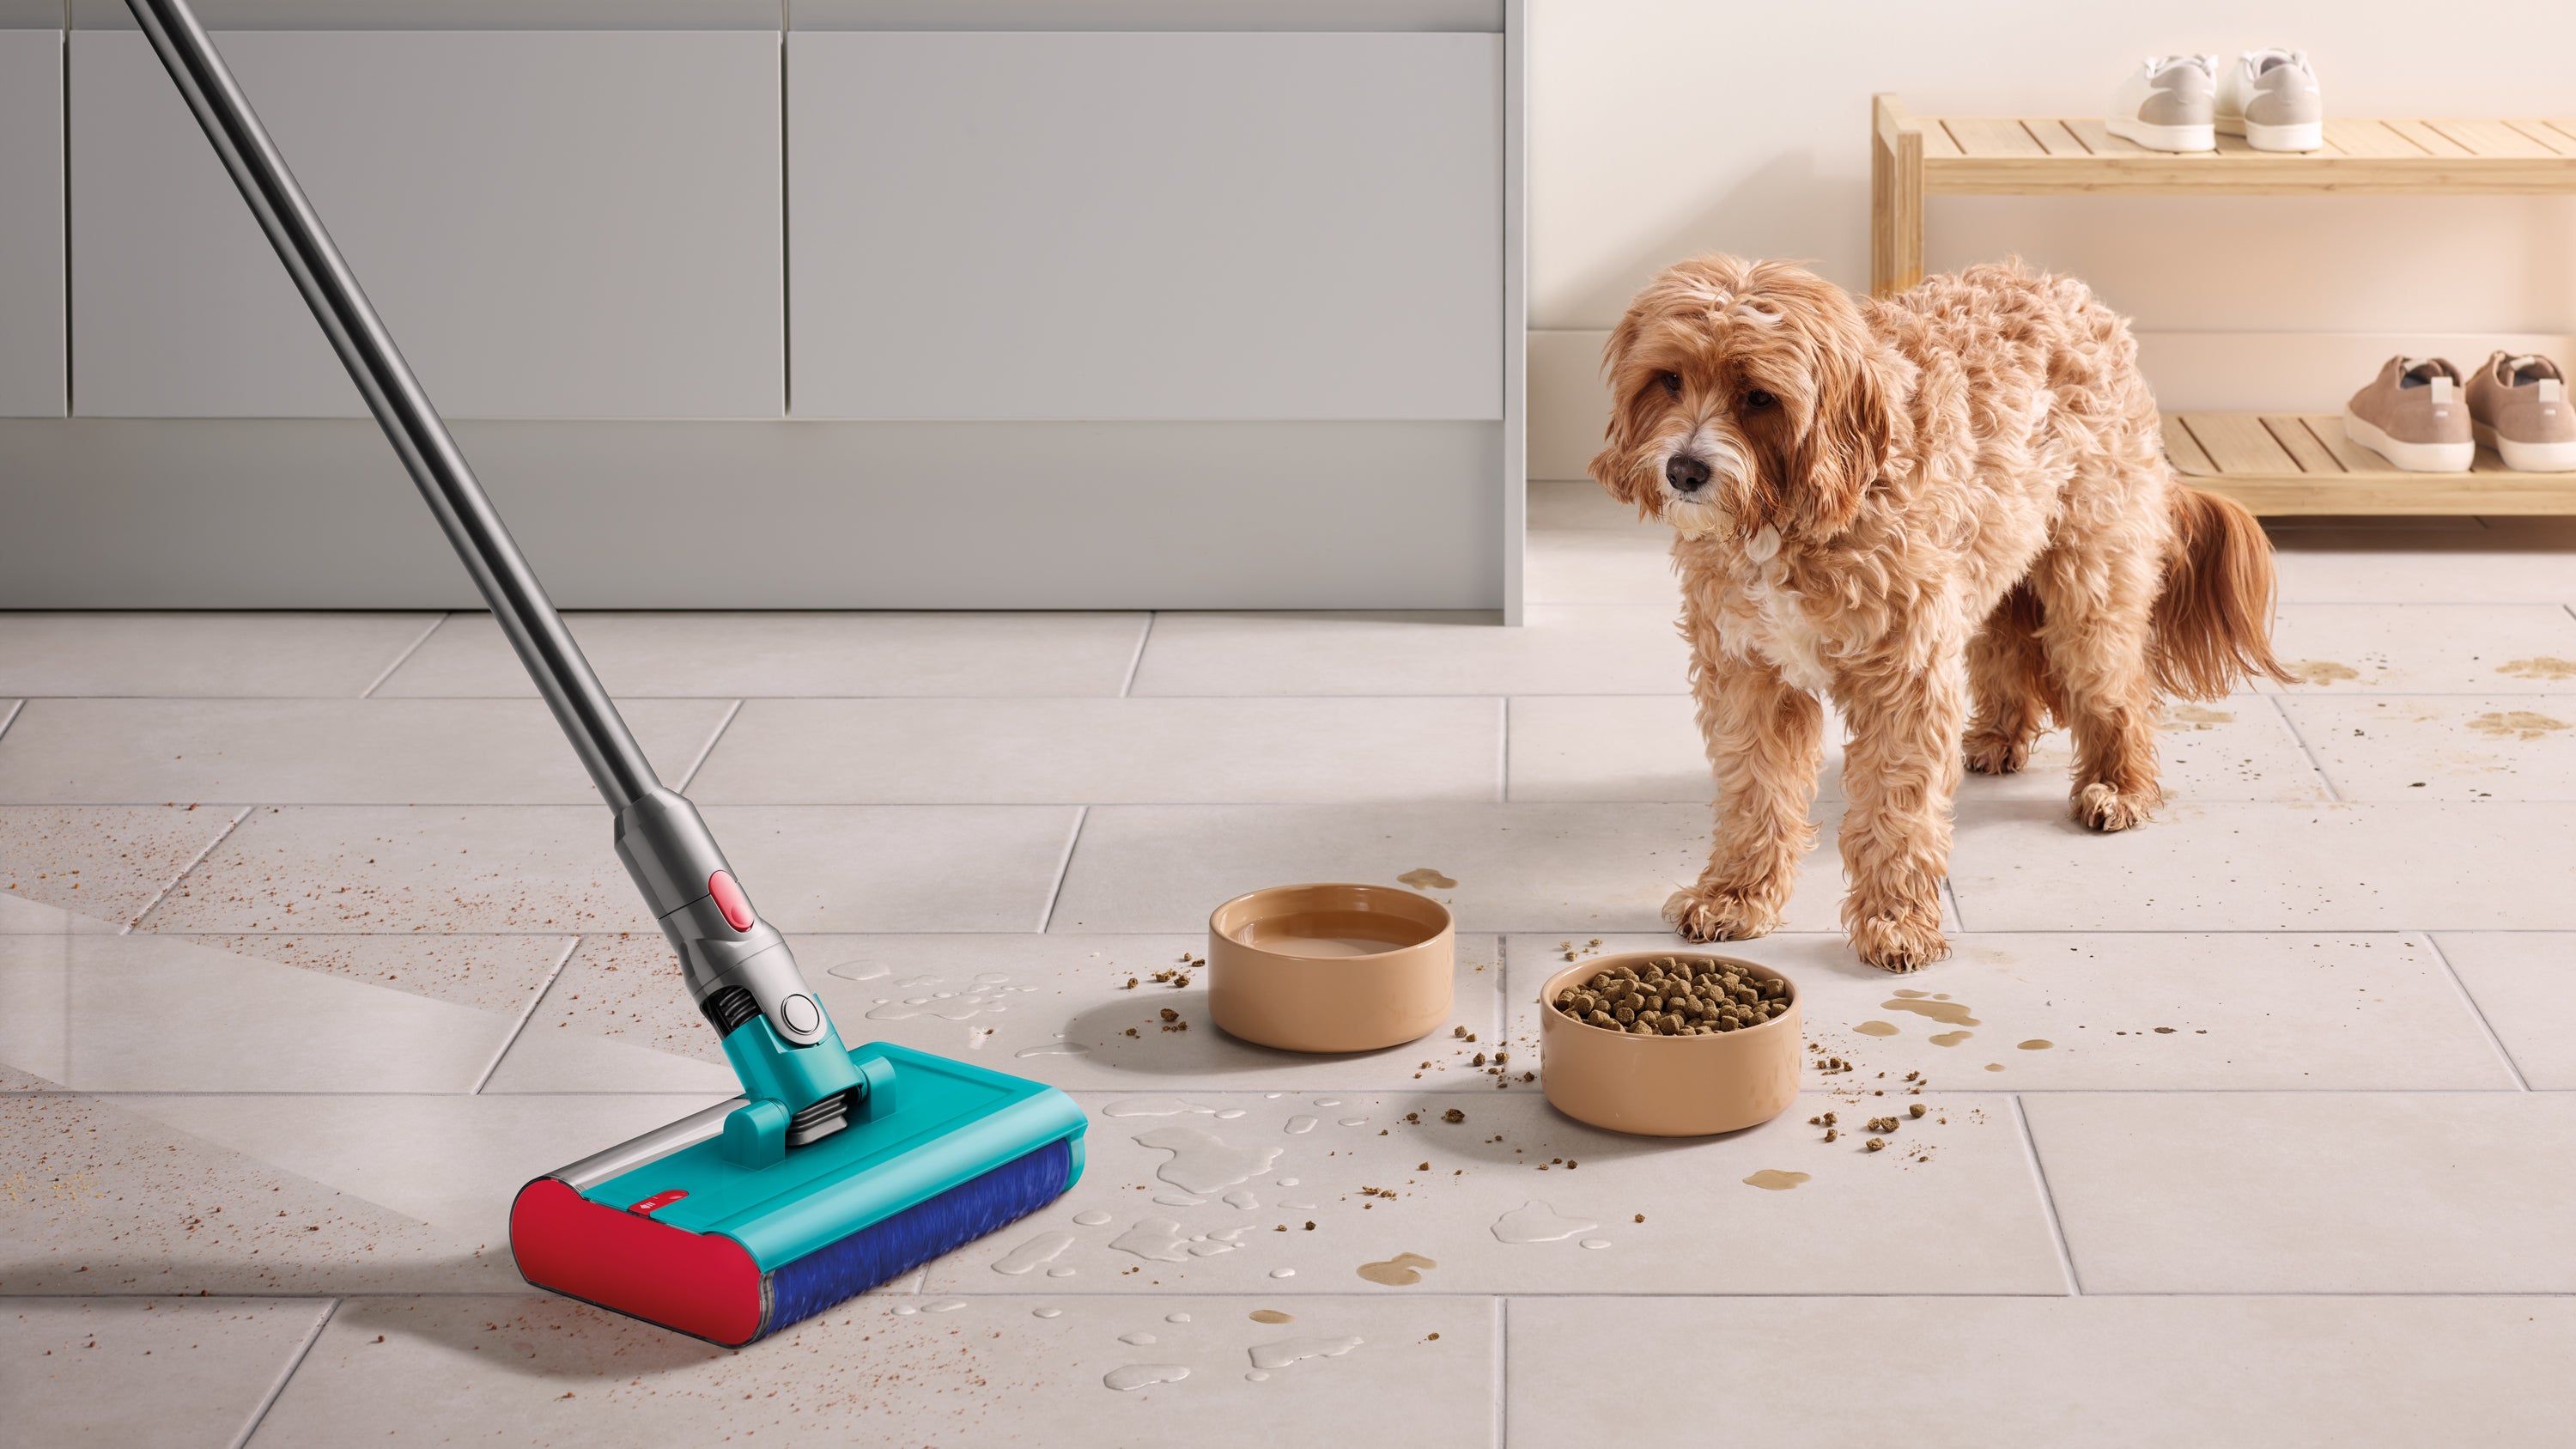 Use the Dyson Submarine wet cleaning head on a tile floor to clean up spilled food and small dog paw prints.